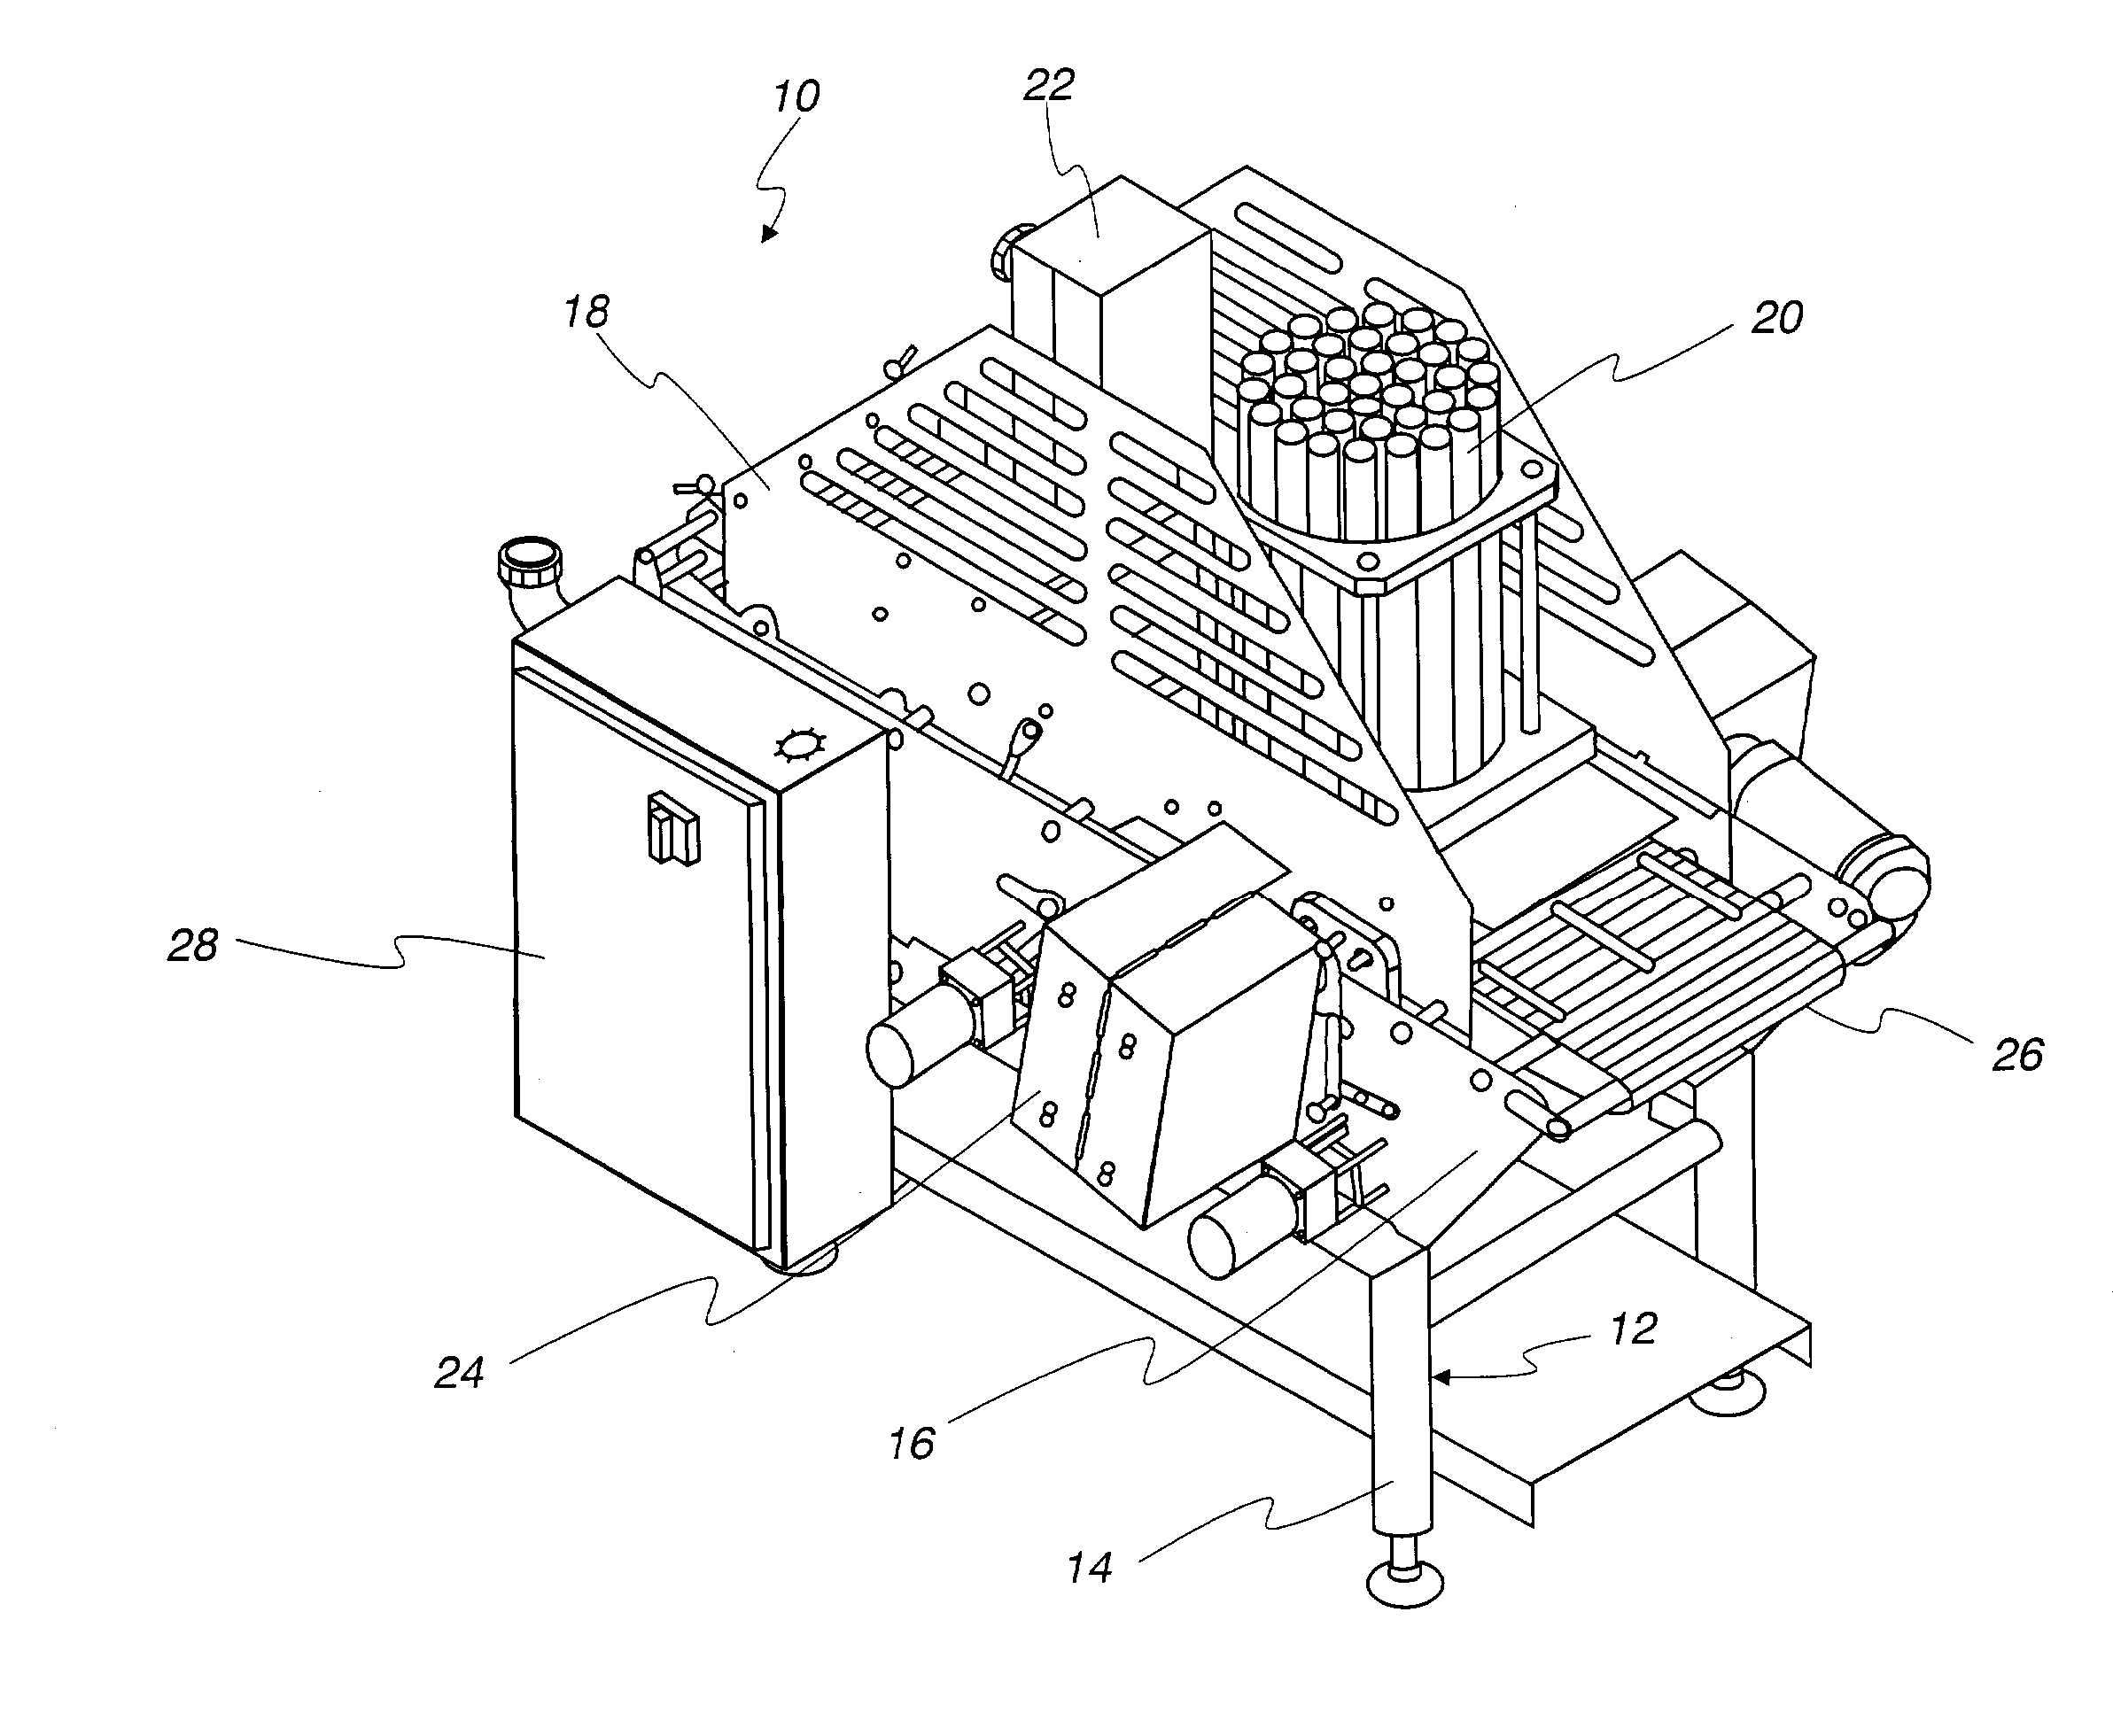 Food slicing apparatus for a food processing line